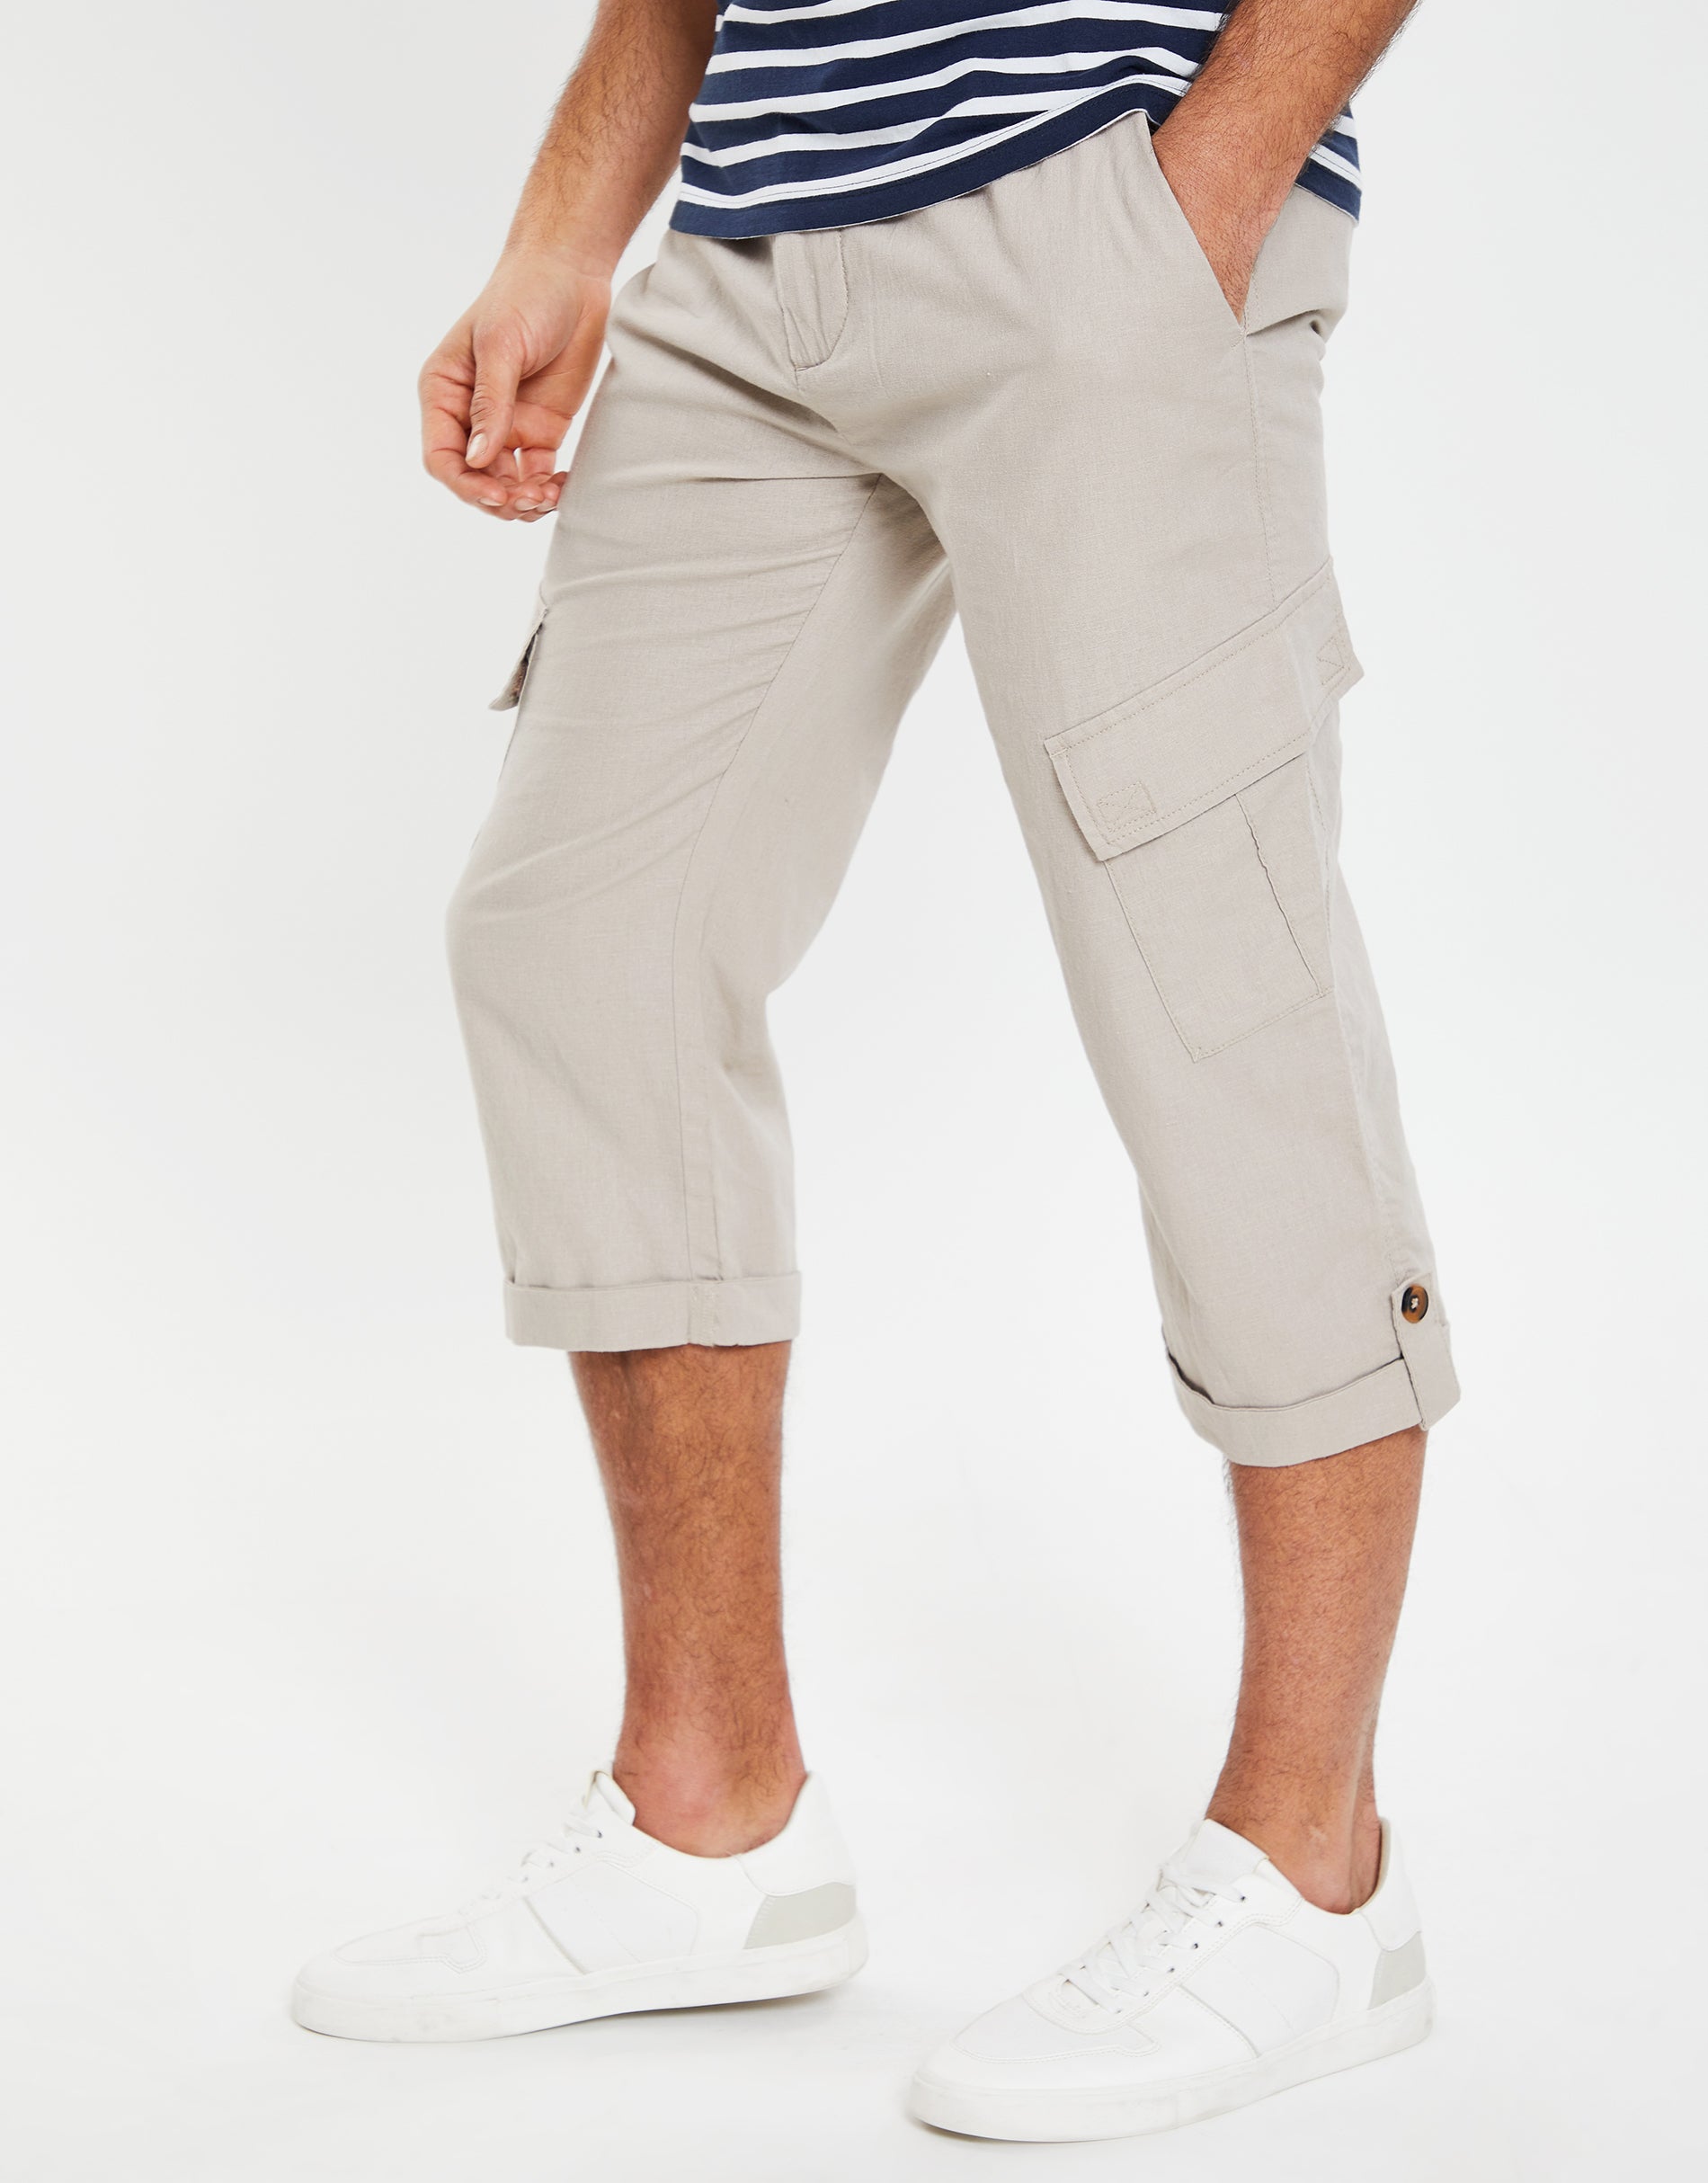 Mens Three Quarter Shorts Suppliers 19162634  Wholesale Manufacturers and  Exporters